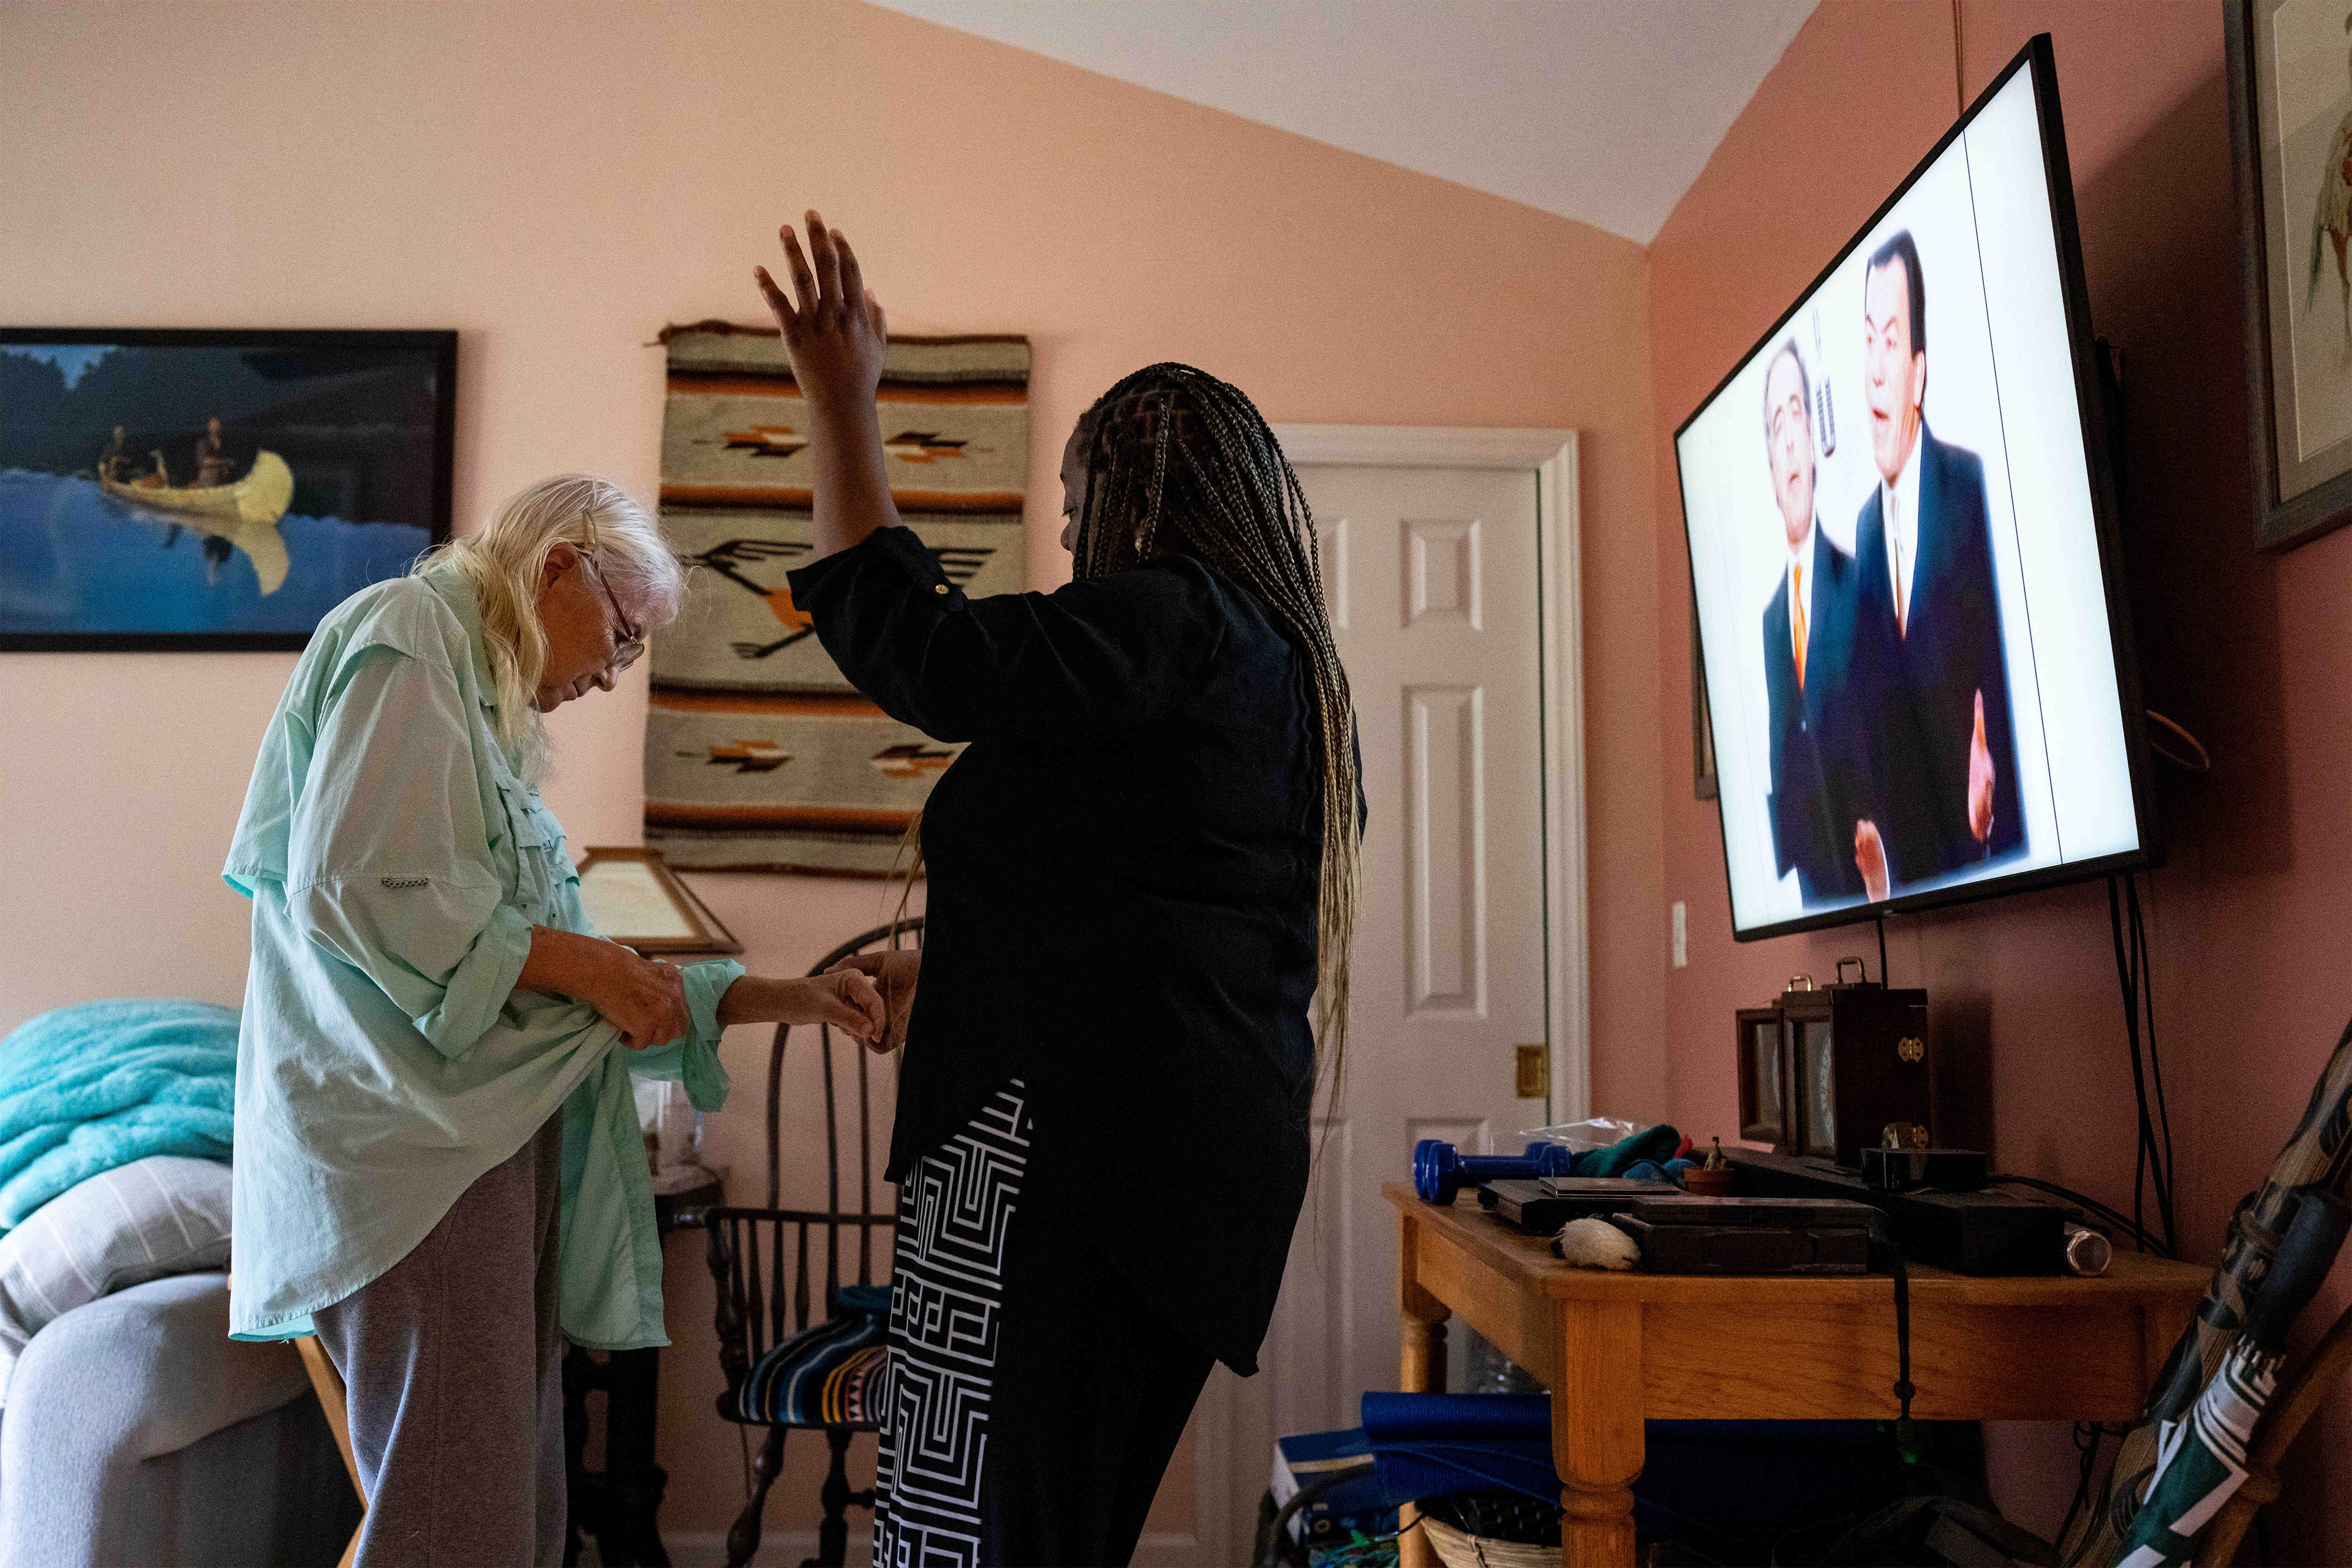 A photo of a caretaker dancing with an elderly woman indoors.